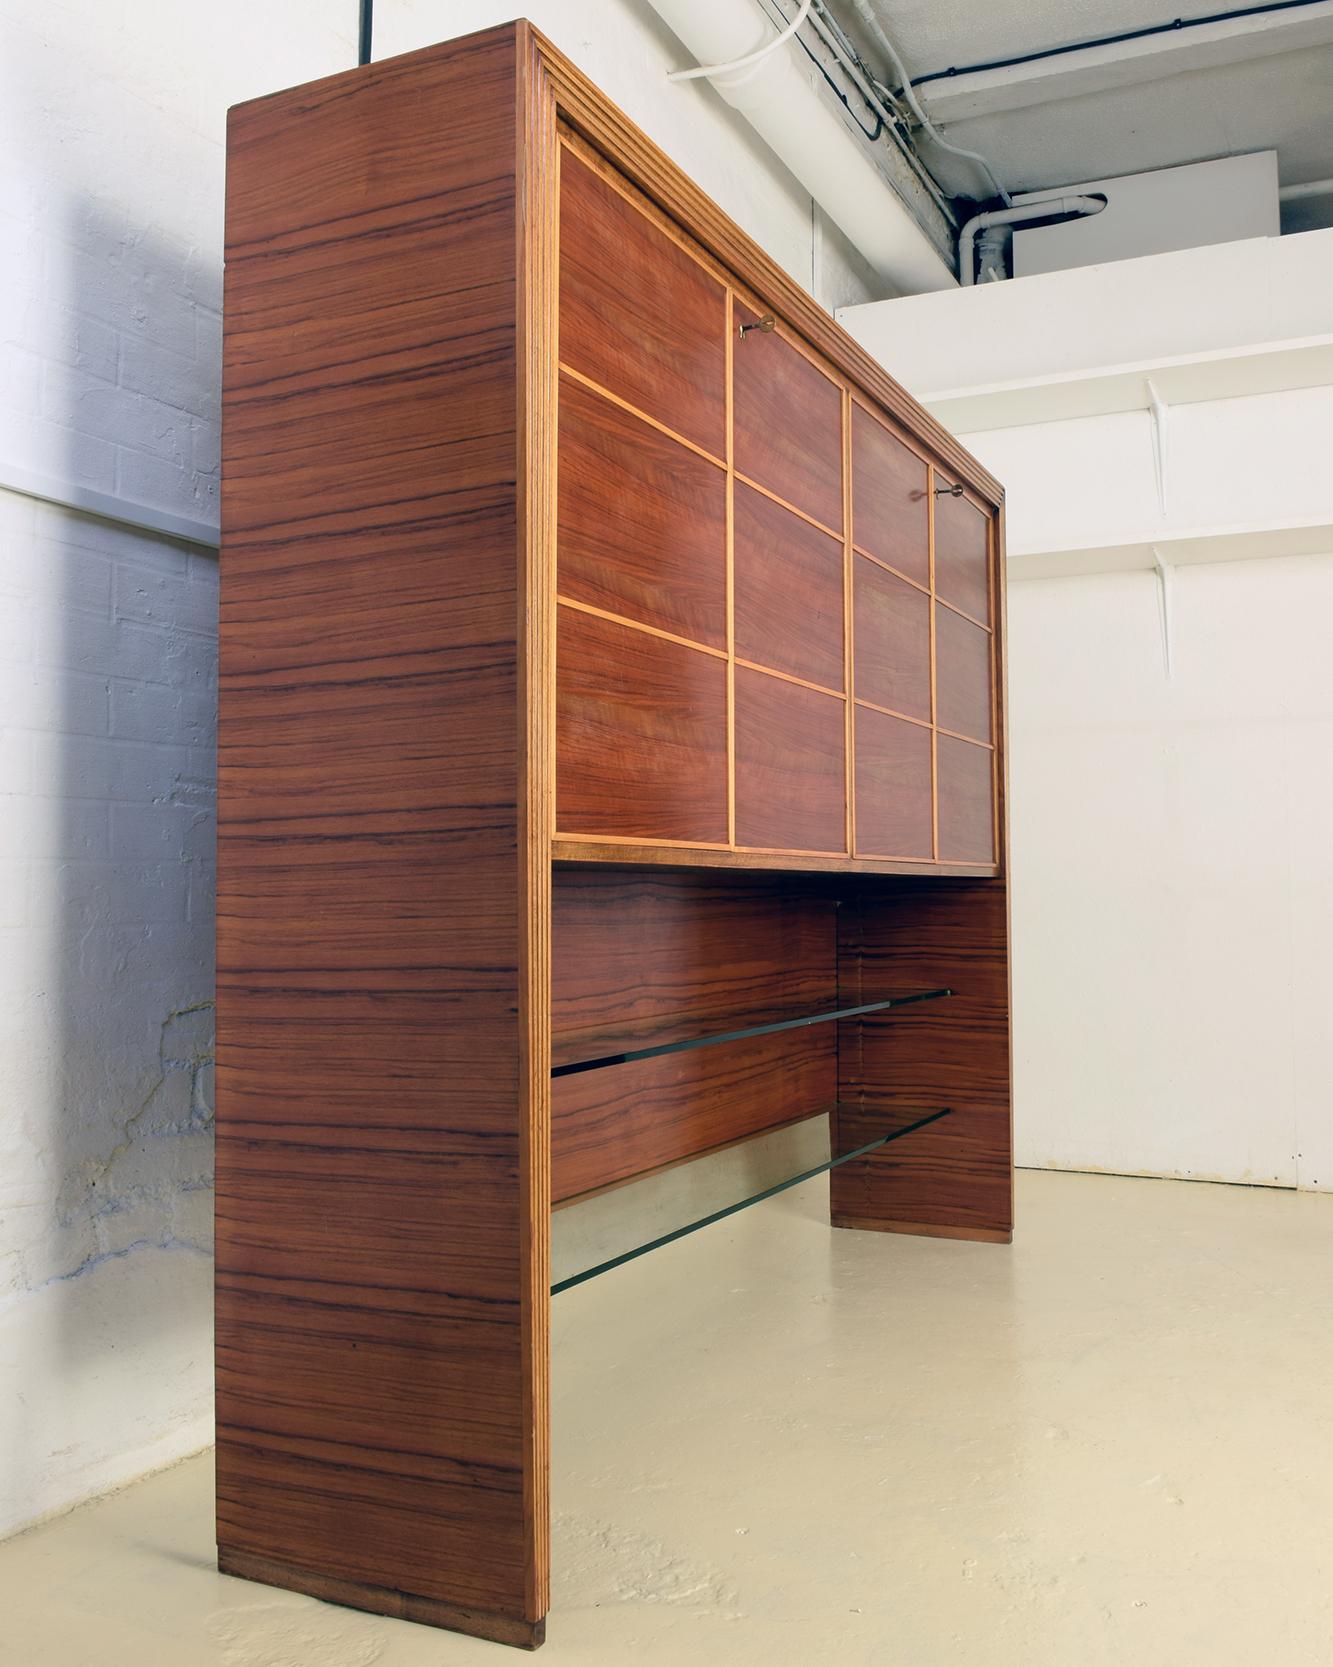 Art Deco Large Cabinet by Mobili Saragoni, Milano, Style of Gio Ponti, 1930s-1940s